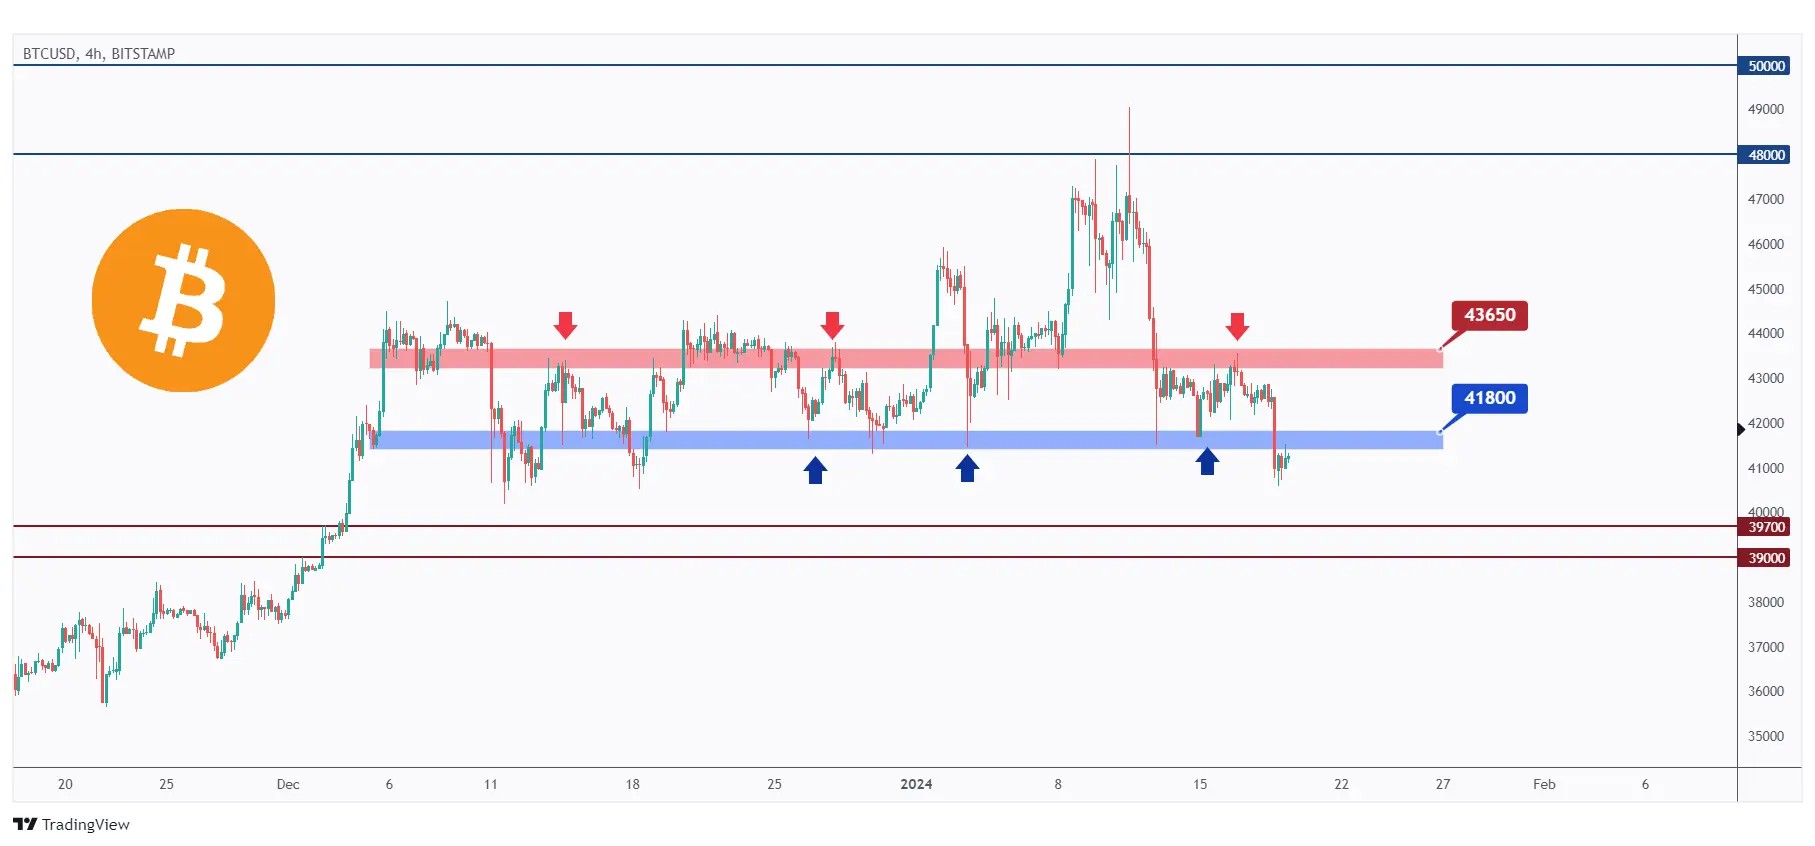 BTC 4H chart shows that the bears are currently in control and we are expecting a continuation till $39000 as long as the resistance holds.